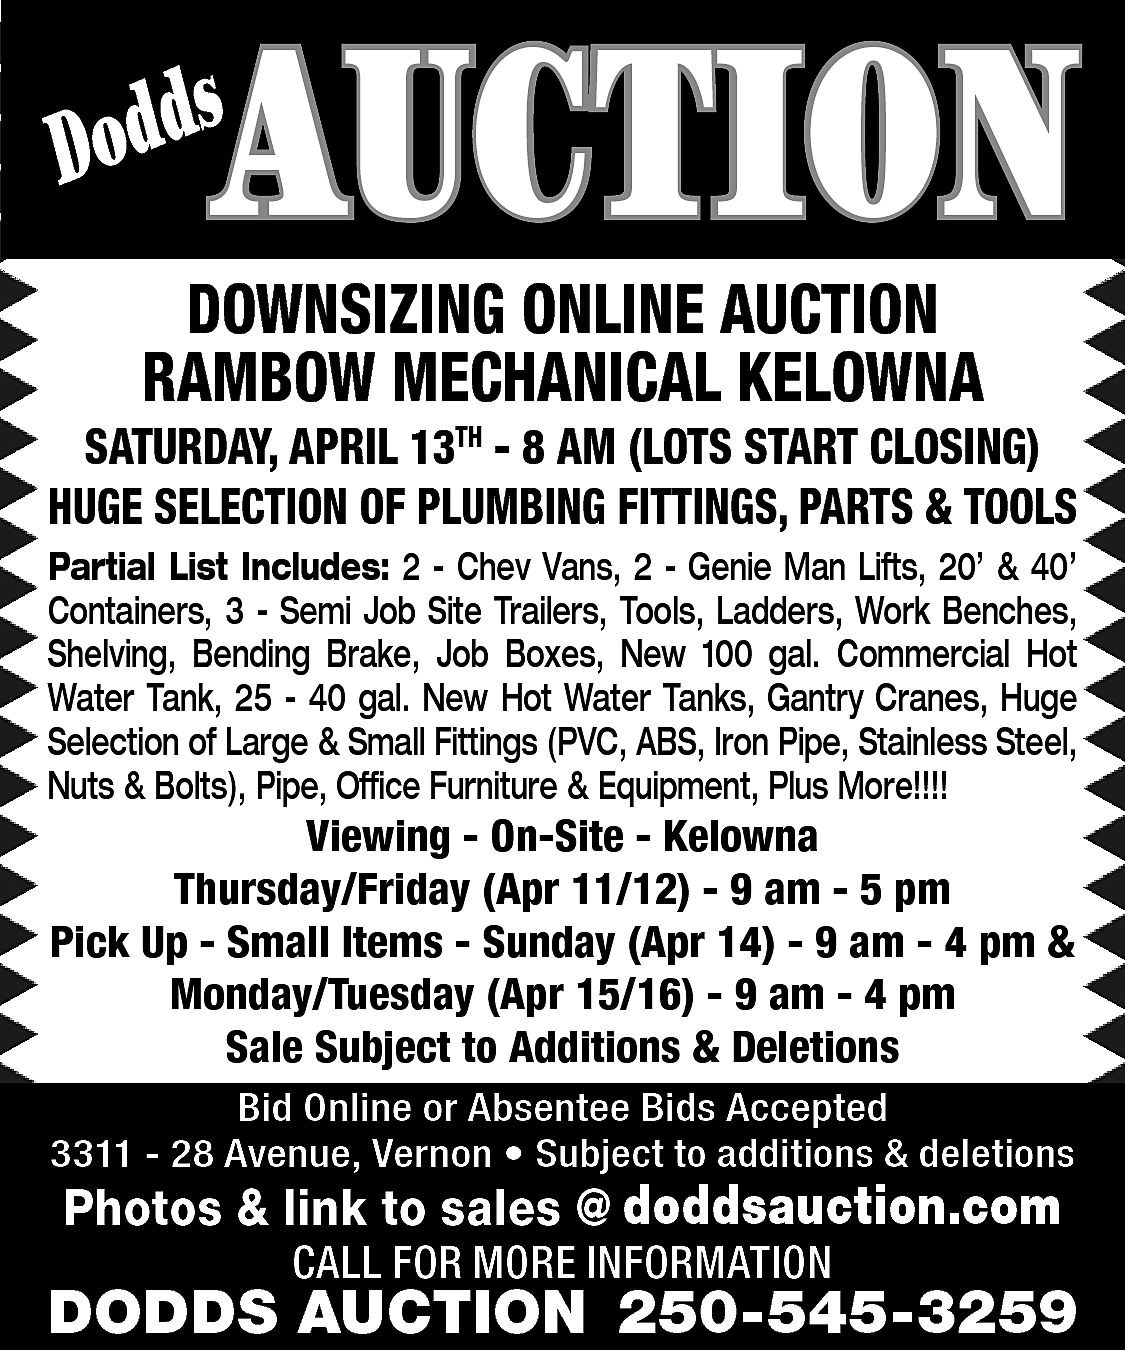 AUCTION <br> <br>s <br>Dodd <br>  AUCTION    s  Dodd    DOWNSIZING ONLINE AUCTION  RAMBOW MECHANICAL KELOWNA    SATURDAY, APRIL 13TH - 8 AM (LOTS START CLOSING)  HUGE SELECTION OF PLUMBING FITTINGS, PARTS & TOOLS  Partial List Includes: 2 - Chev Vans, 2 - Genie Man Lifts, 20’ & 40’  Containers, 3 - Semi Job Site Trailers, Tools, Ladders, Work Benches,  Shelving, Bending Brake, Job Boxes, New 100 gal. Commercial Hot  Water Tank, 25 - 40 gal. New Hot Water Tanks, Gantry Cranes, Huge  Selection of Large & Small Fittings (PVC, ABS, Iron Pipe, Stainless Steel,  Nuts & Bolts), Pipe, Office Furniture & Equipment, Plus More!!!!    Viewing - On-Site - Kelowna  Thursday/Friday (Apr 11/12) - 9 am - 5 pm  Pick Up - Small Items - Sunday (Apr 14) - 9 am - 4 pm &  Monday/Tuesday (Apr 15/16) - 9 am - 4 pm  Sale Subject to Additions & Deletions  Bid Online or Absentee Bids Accepted  3311 - 28 Avenue, Vernon • Subject to additions & deletions    www.doddsauction.com  Photos & link to sales @  doddsauction.com  CALL FOR MORE INFORMATION    DODDS AUCTION 250-545-3259    